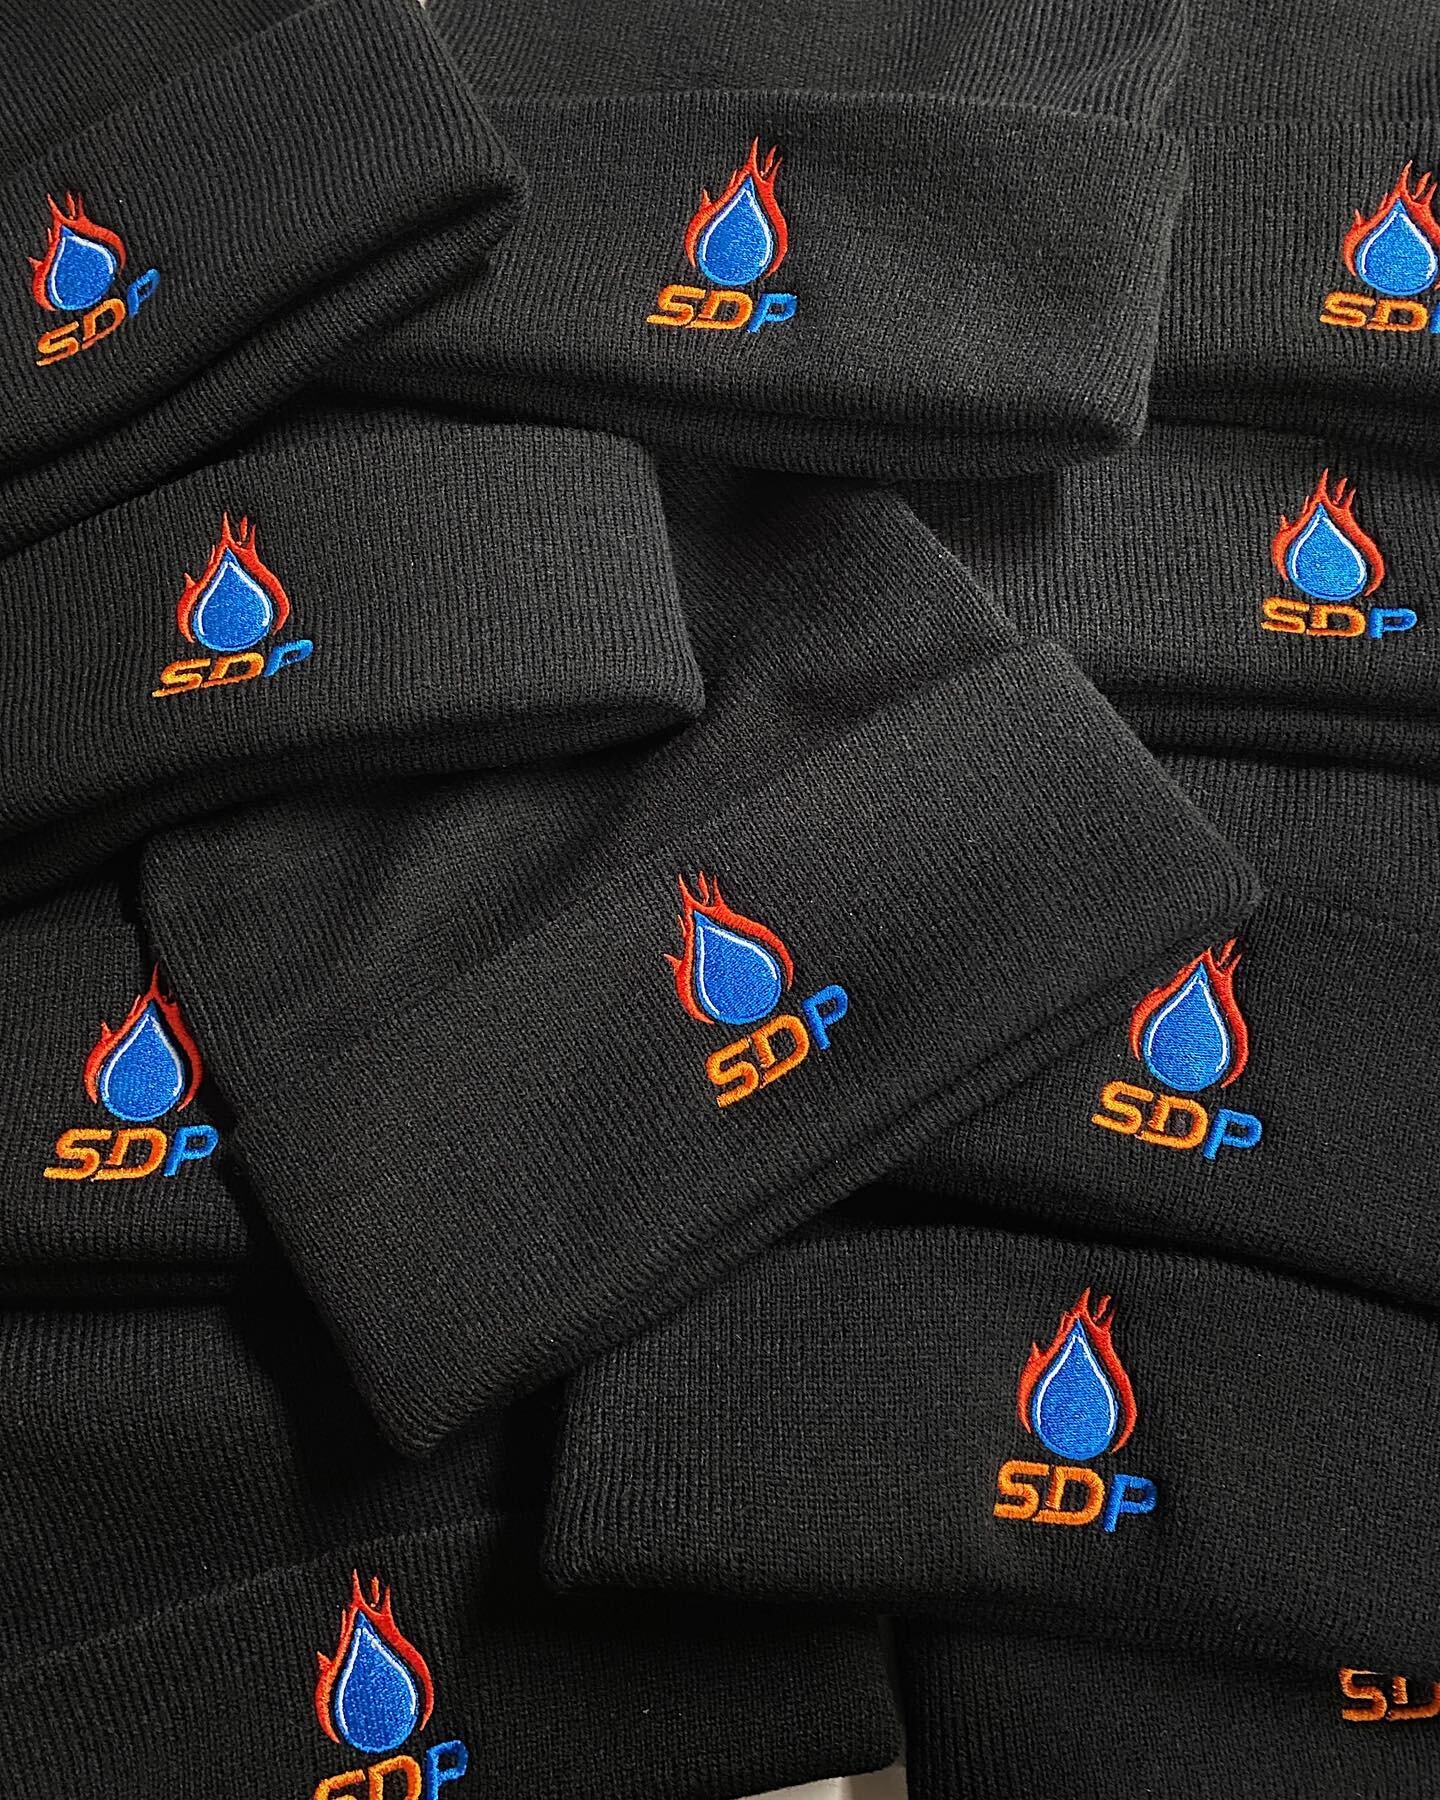 Beanie season is in full swing! Keep your head warm this season with custom embroidered beanies for your work wear.

Chat with us to start your order or fill out our form for a free quote 🙃

nemprints.com.au/quote
LINK IN BIO

#customembroidery #cus